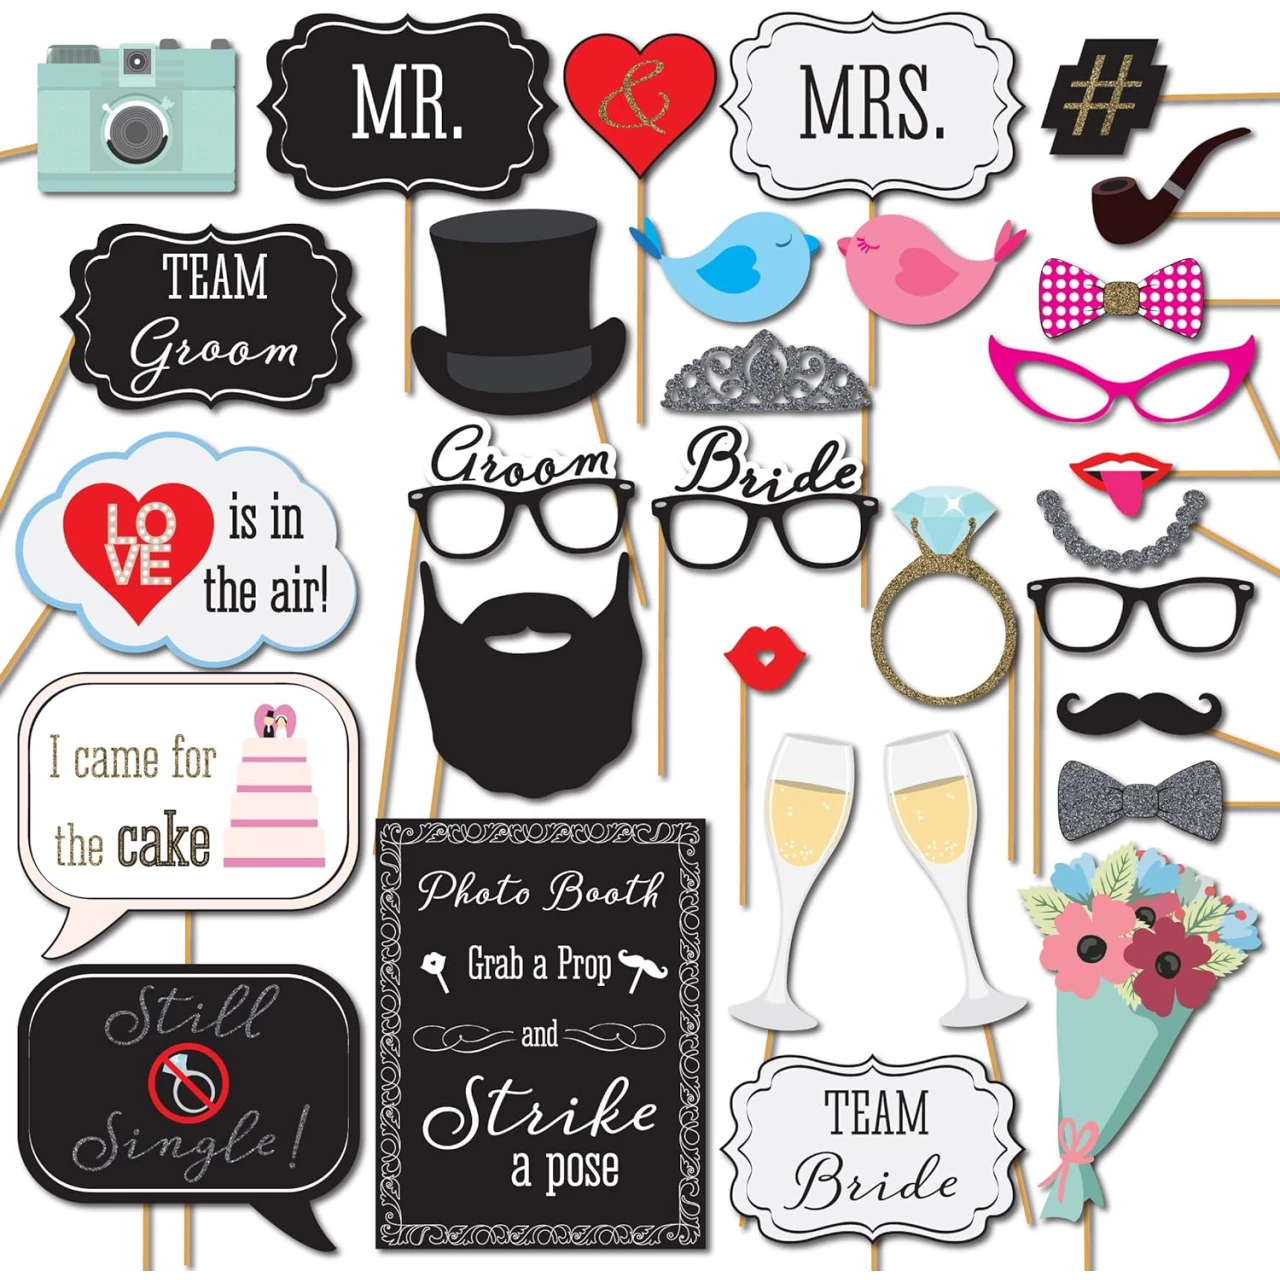 Wedding Photo Booth Props with 8 x 10-Inch Sign, 45 Adhesive Pads, 35 Wooden Sticks - Signs for Wedding Backdrop and Selfie Station